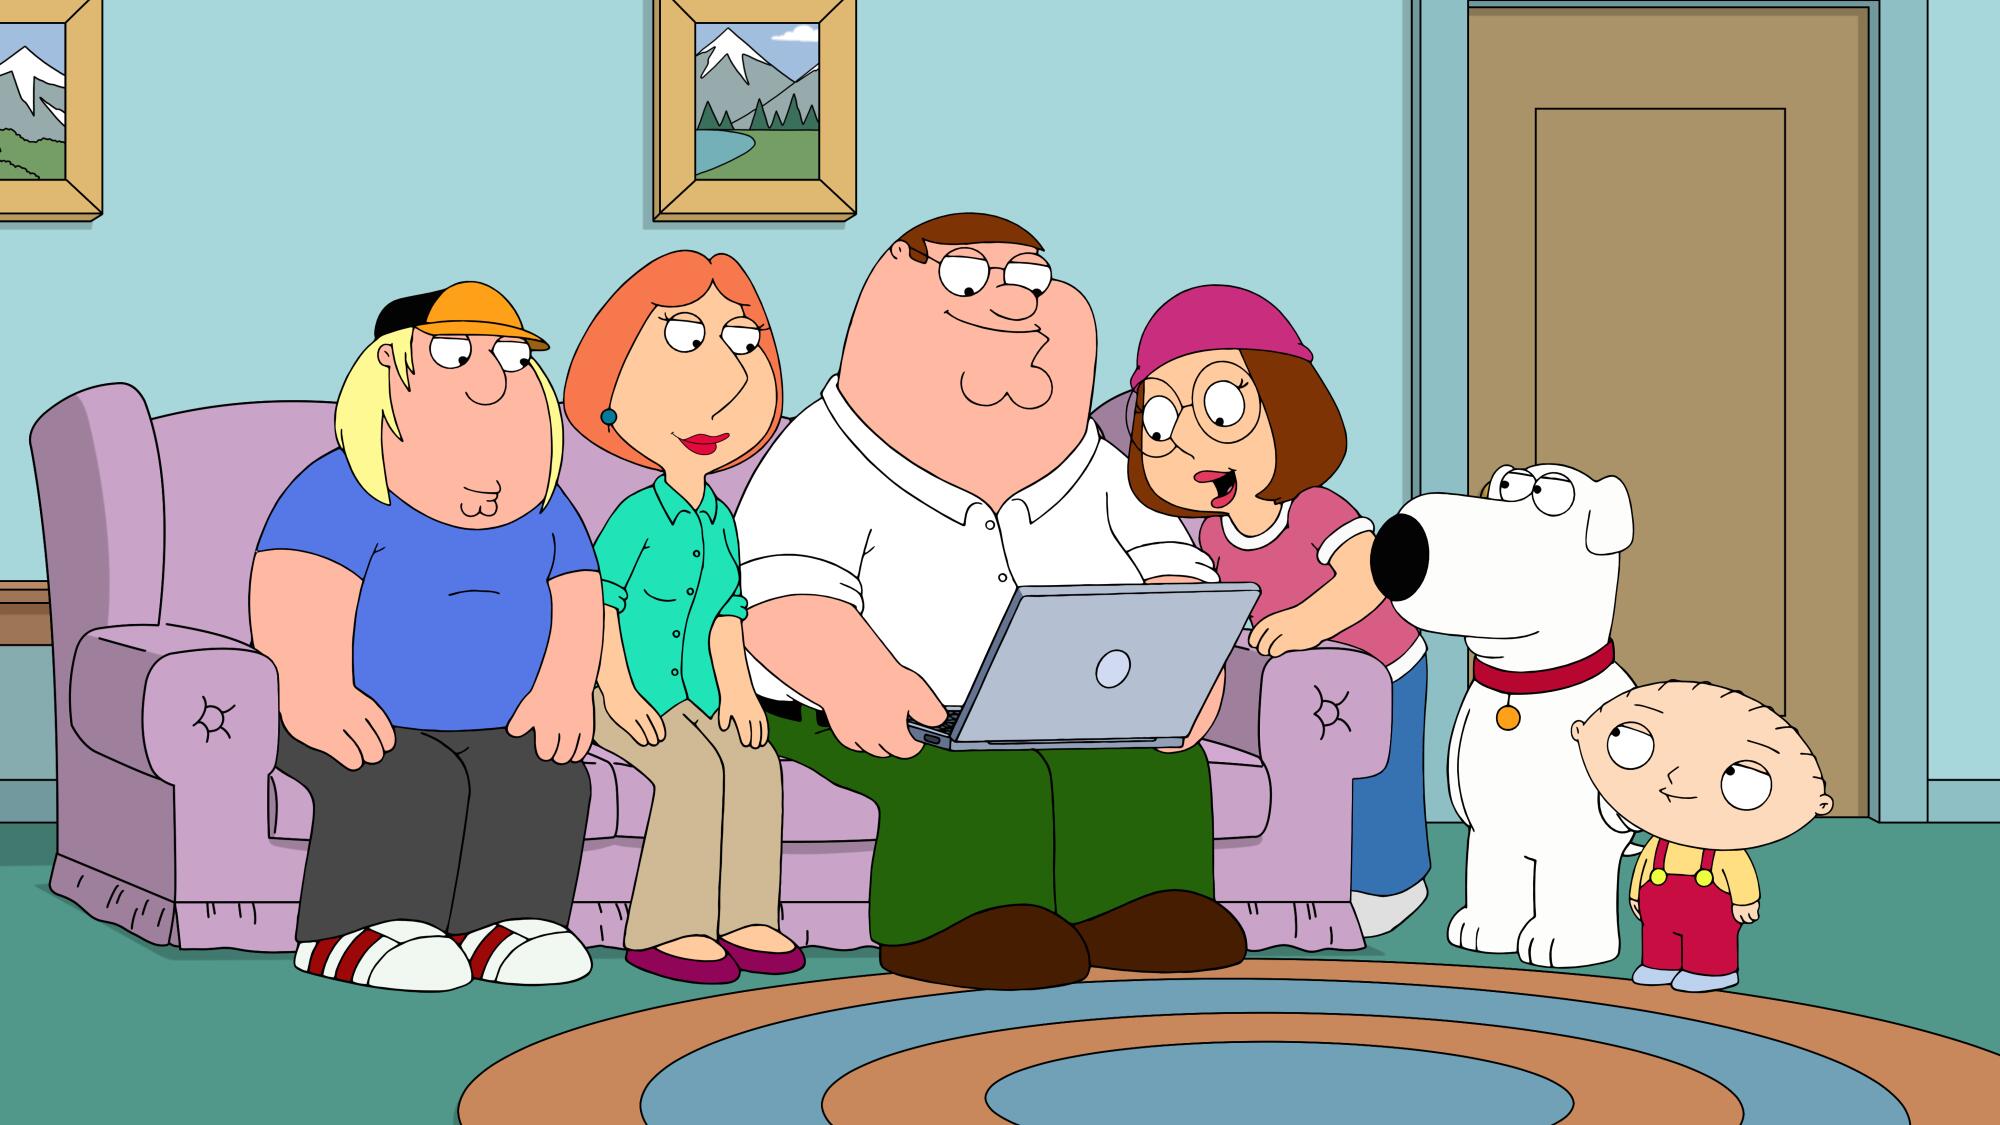 An animated family sits on a couch and looks at a laptop computer screen.